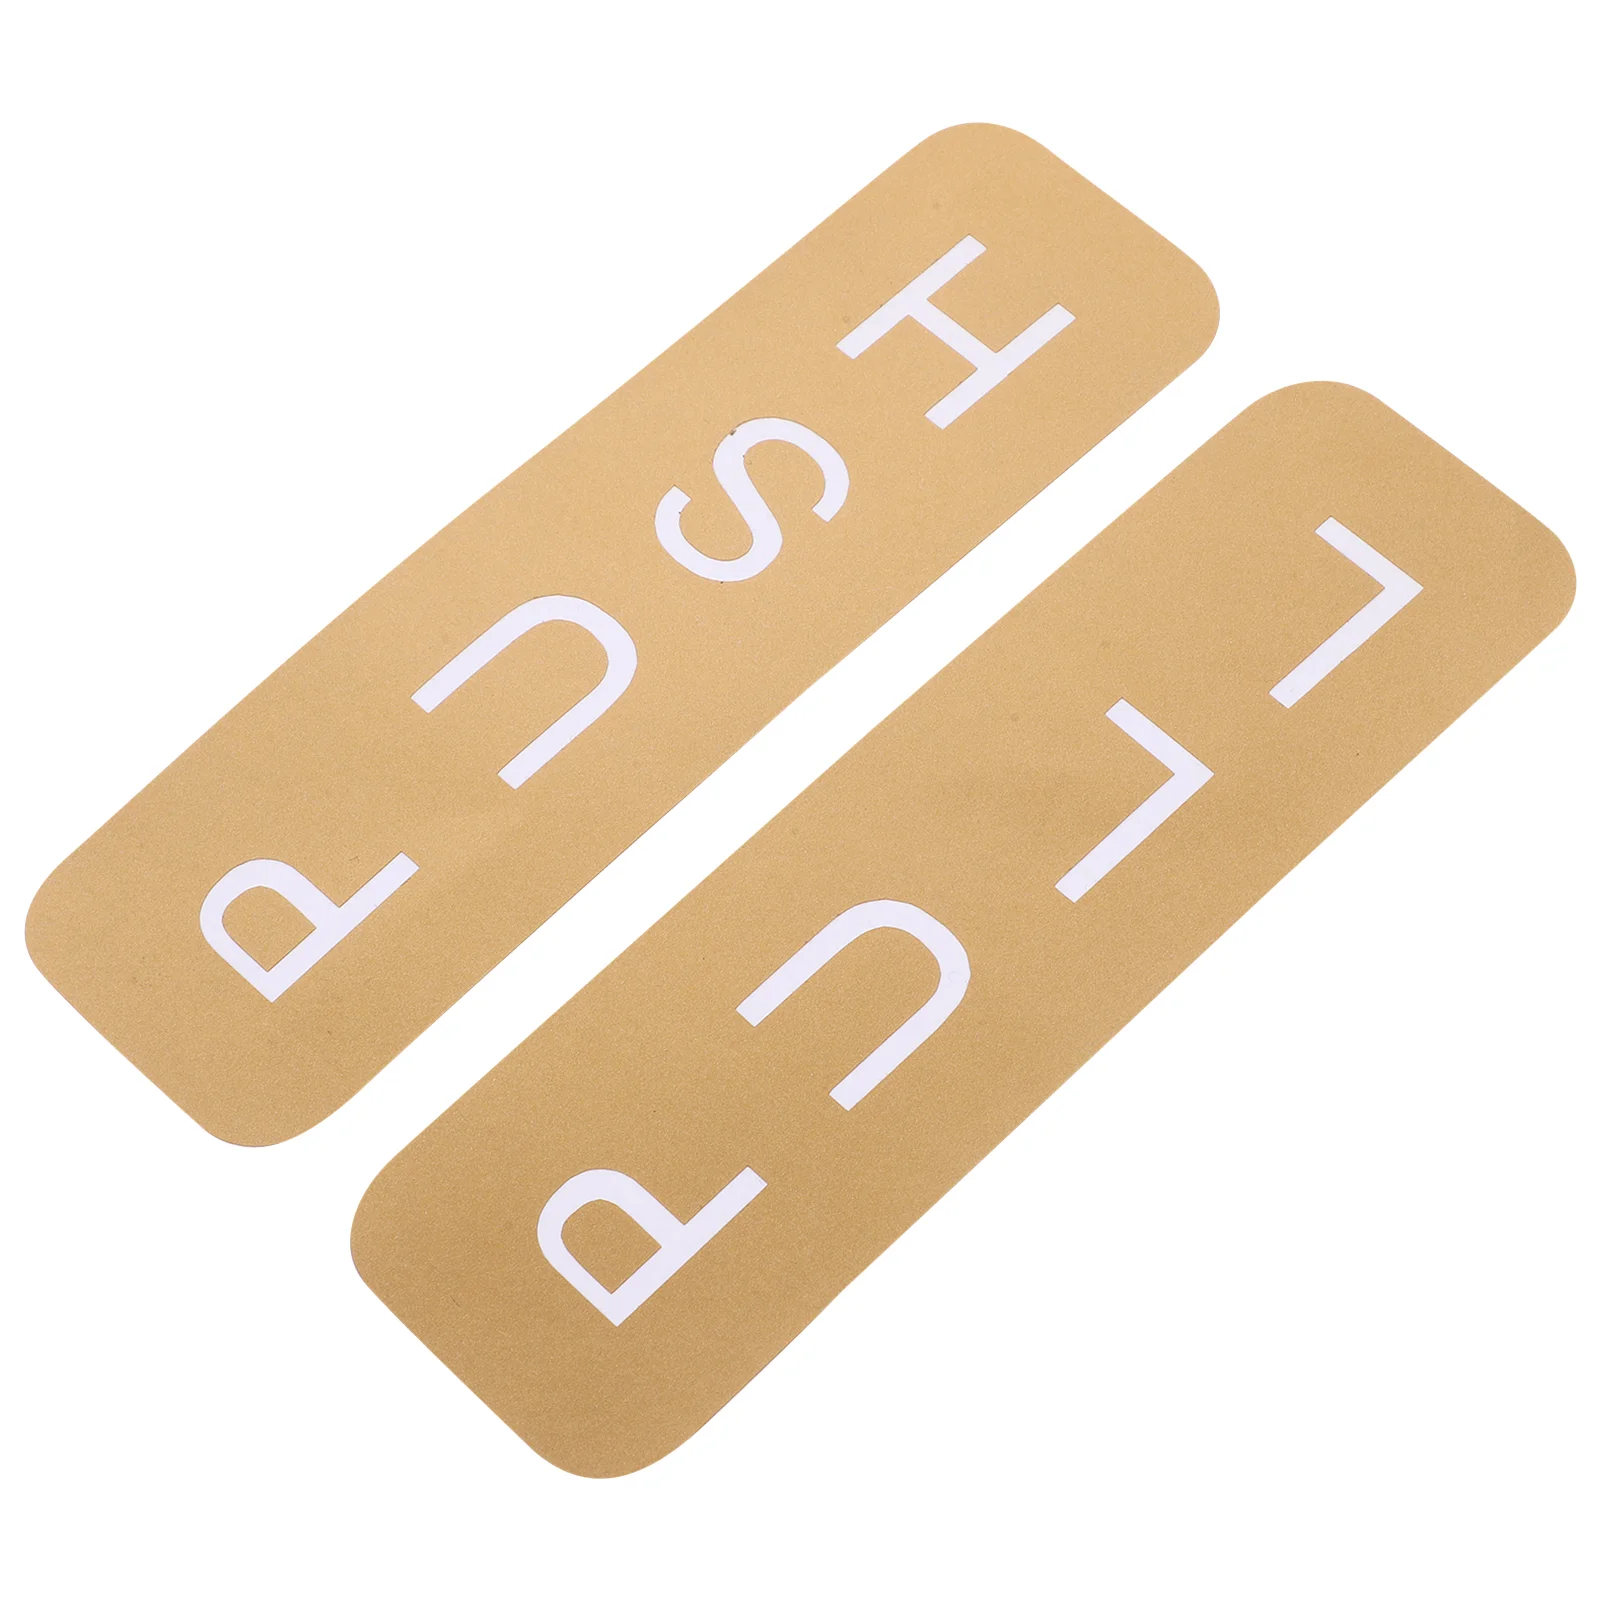 Gold Sliding Door Sticker Stickers Adhesive Pull Push Moving Sign for Decal Pvc Signs Office Glass Doors